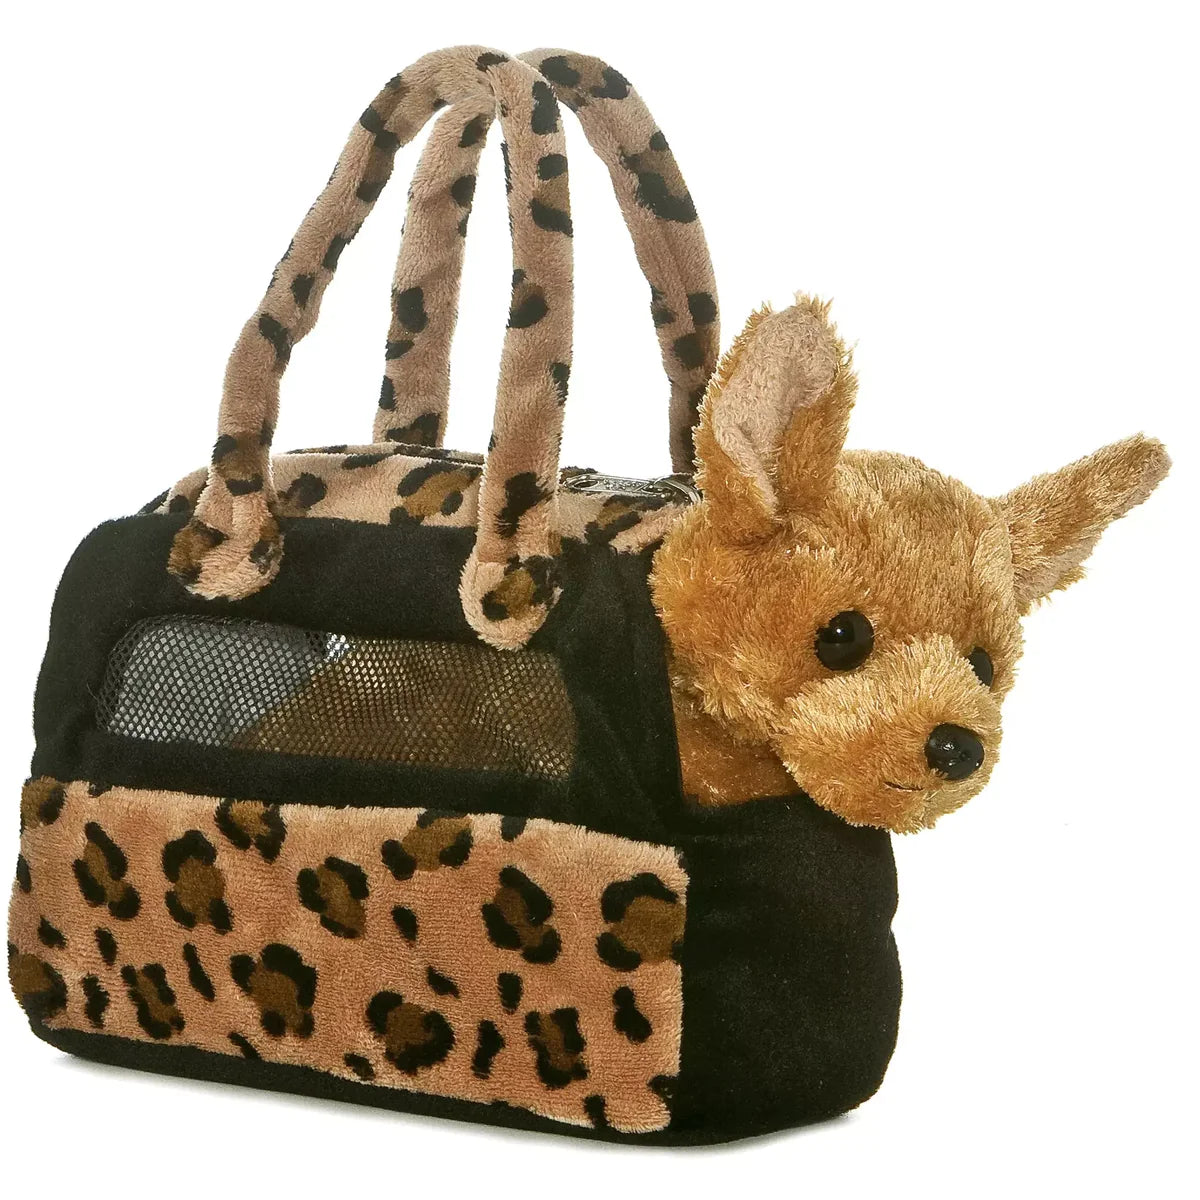 Fancy Pals Chihuahua in Leopard Print Bag